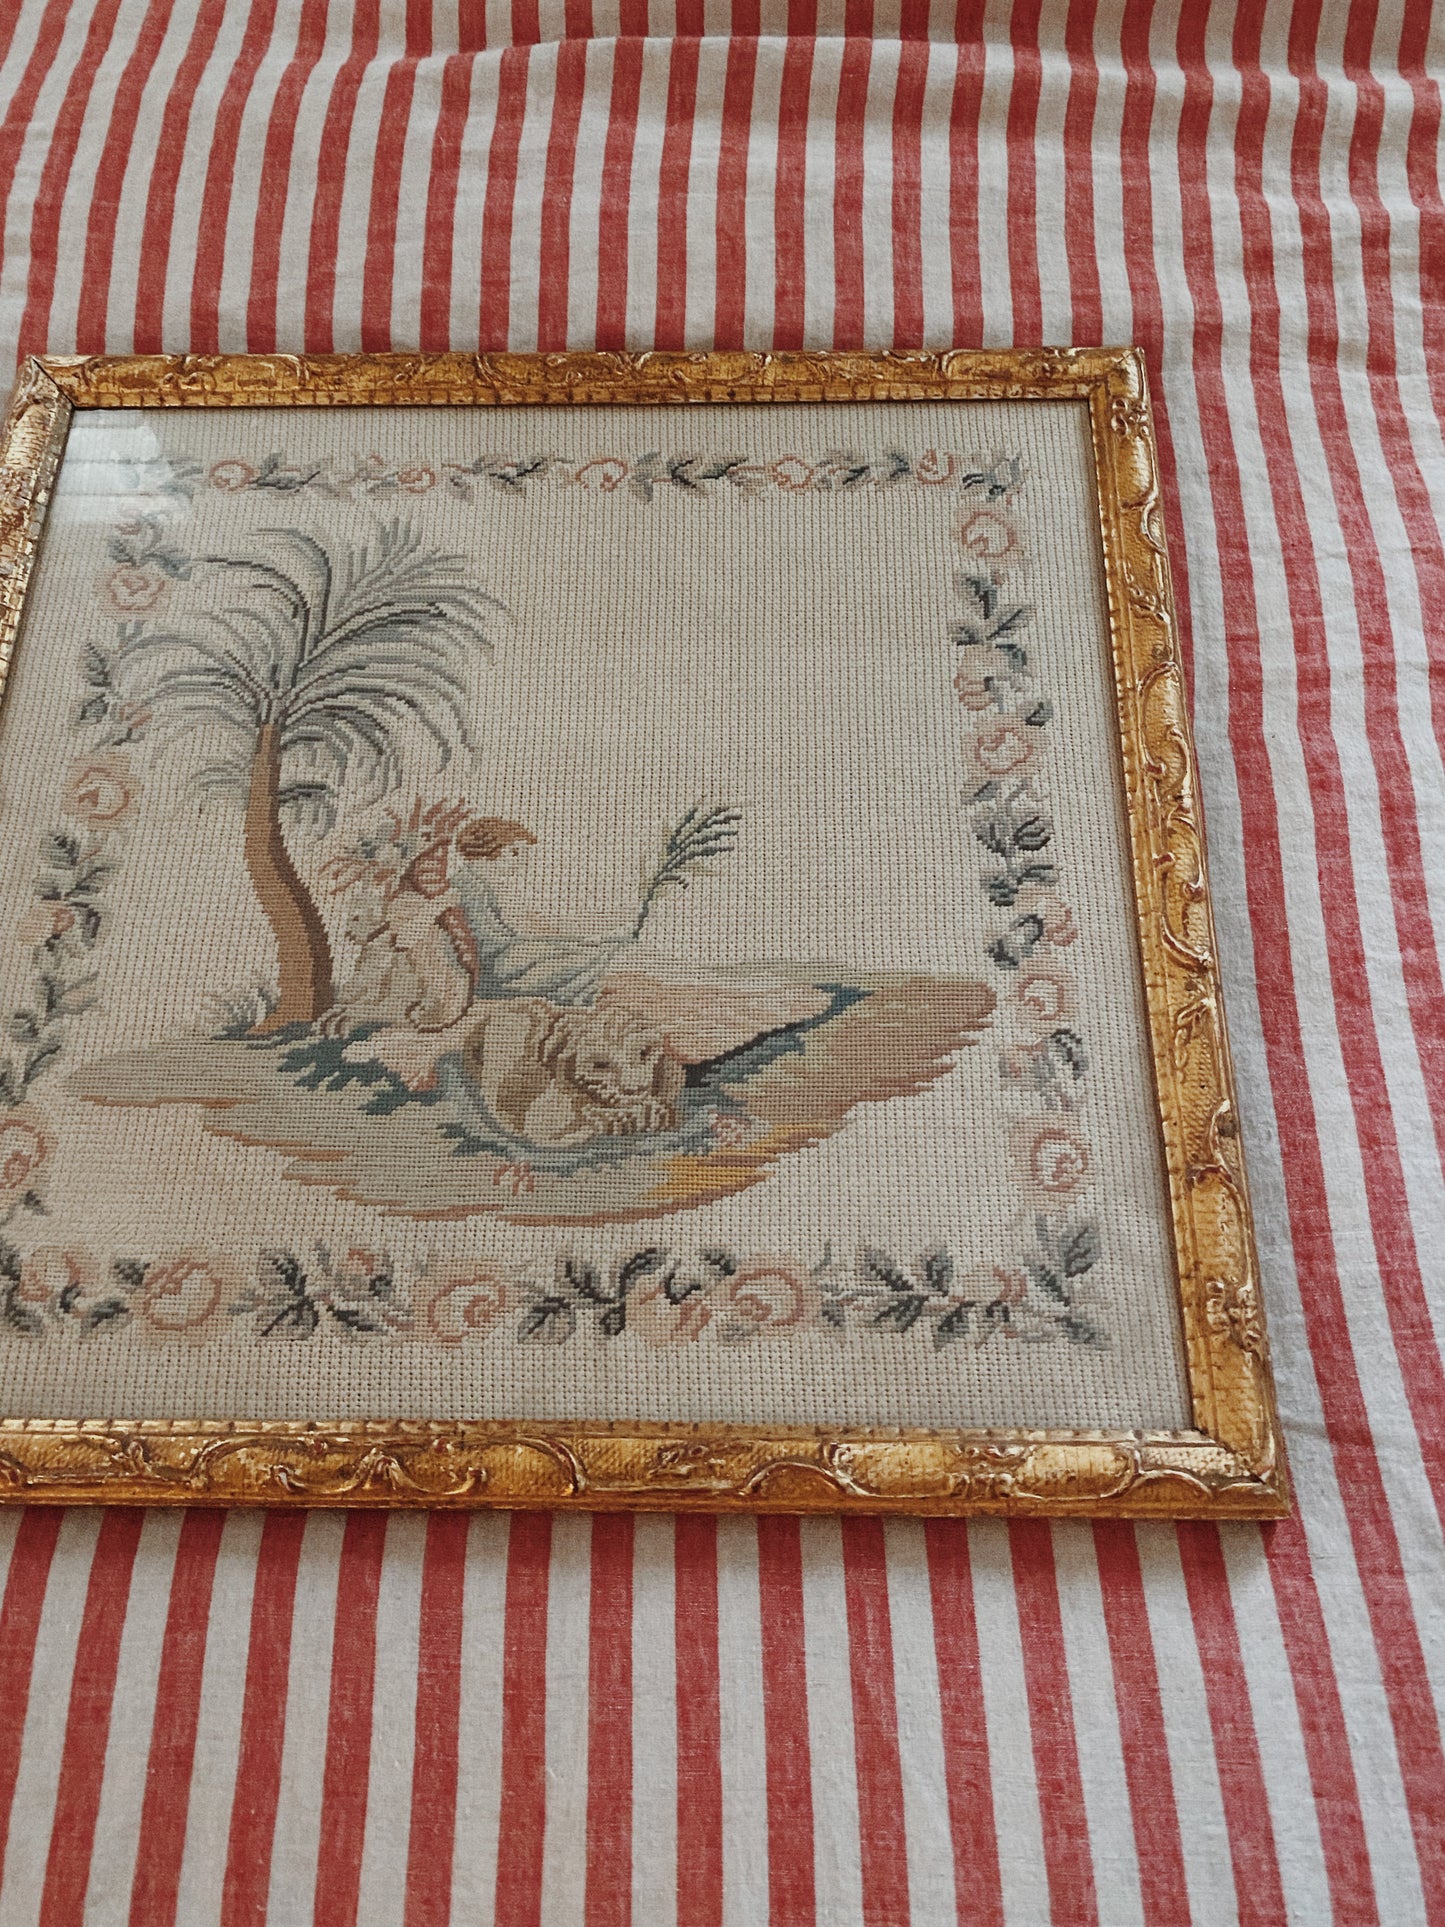 Vintage Needlepoint Tapestry in French Style Gilded Frame- 21x22”